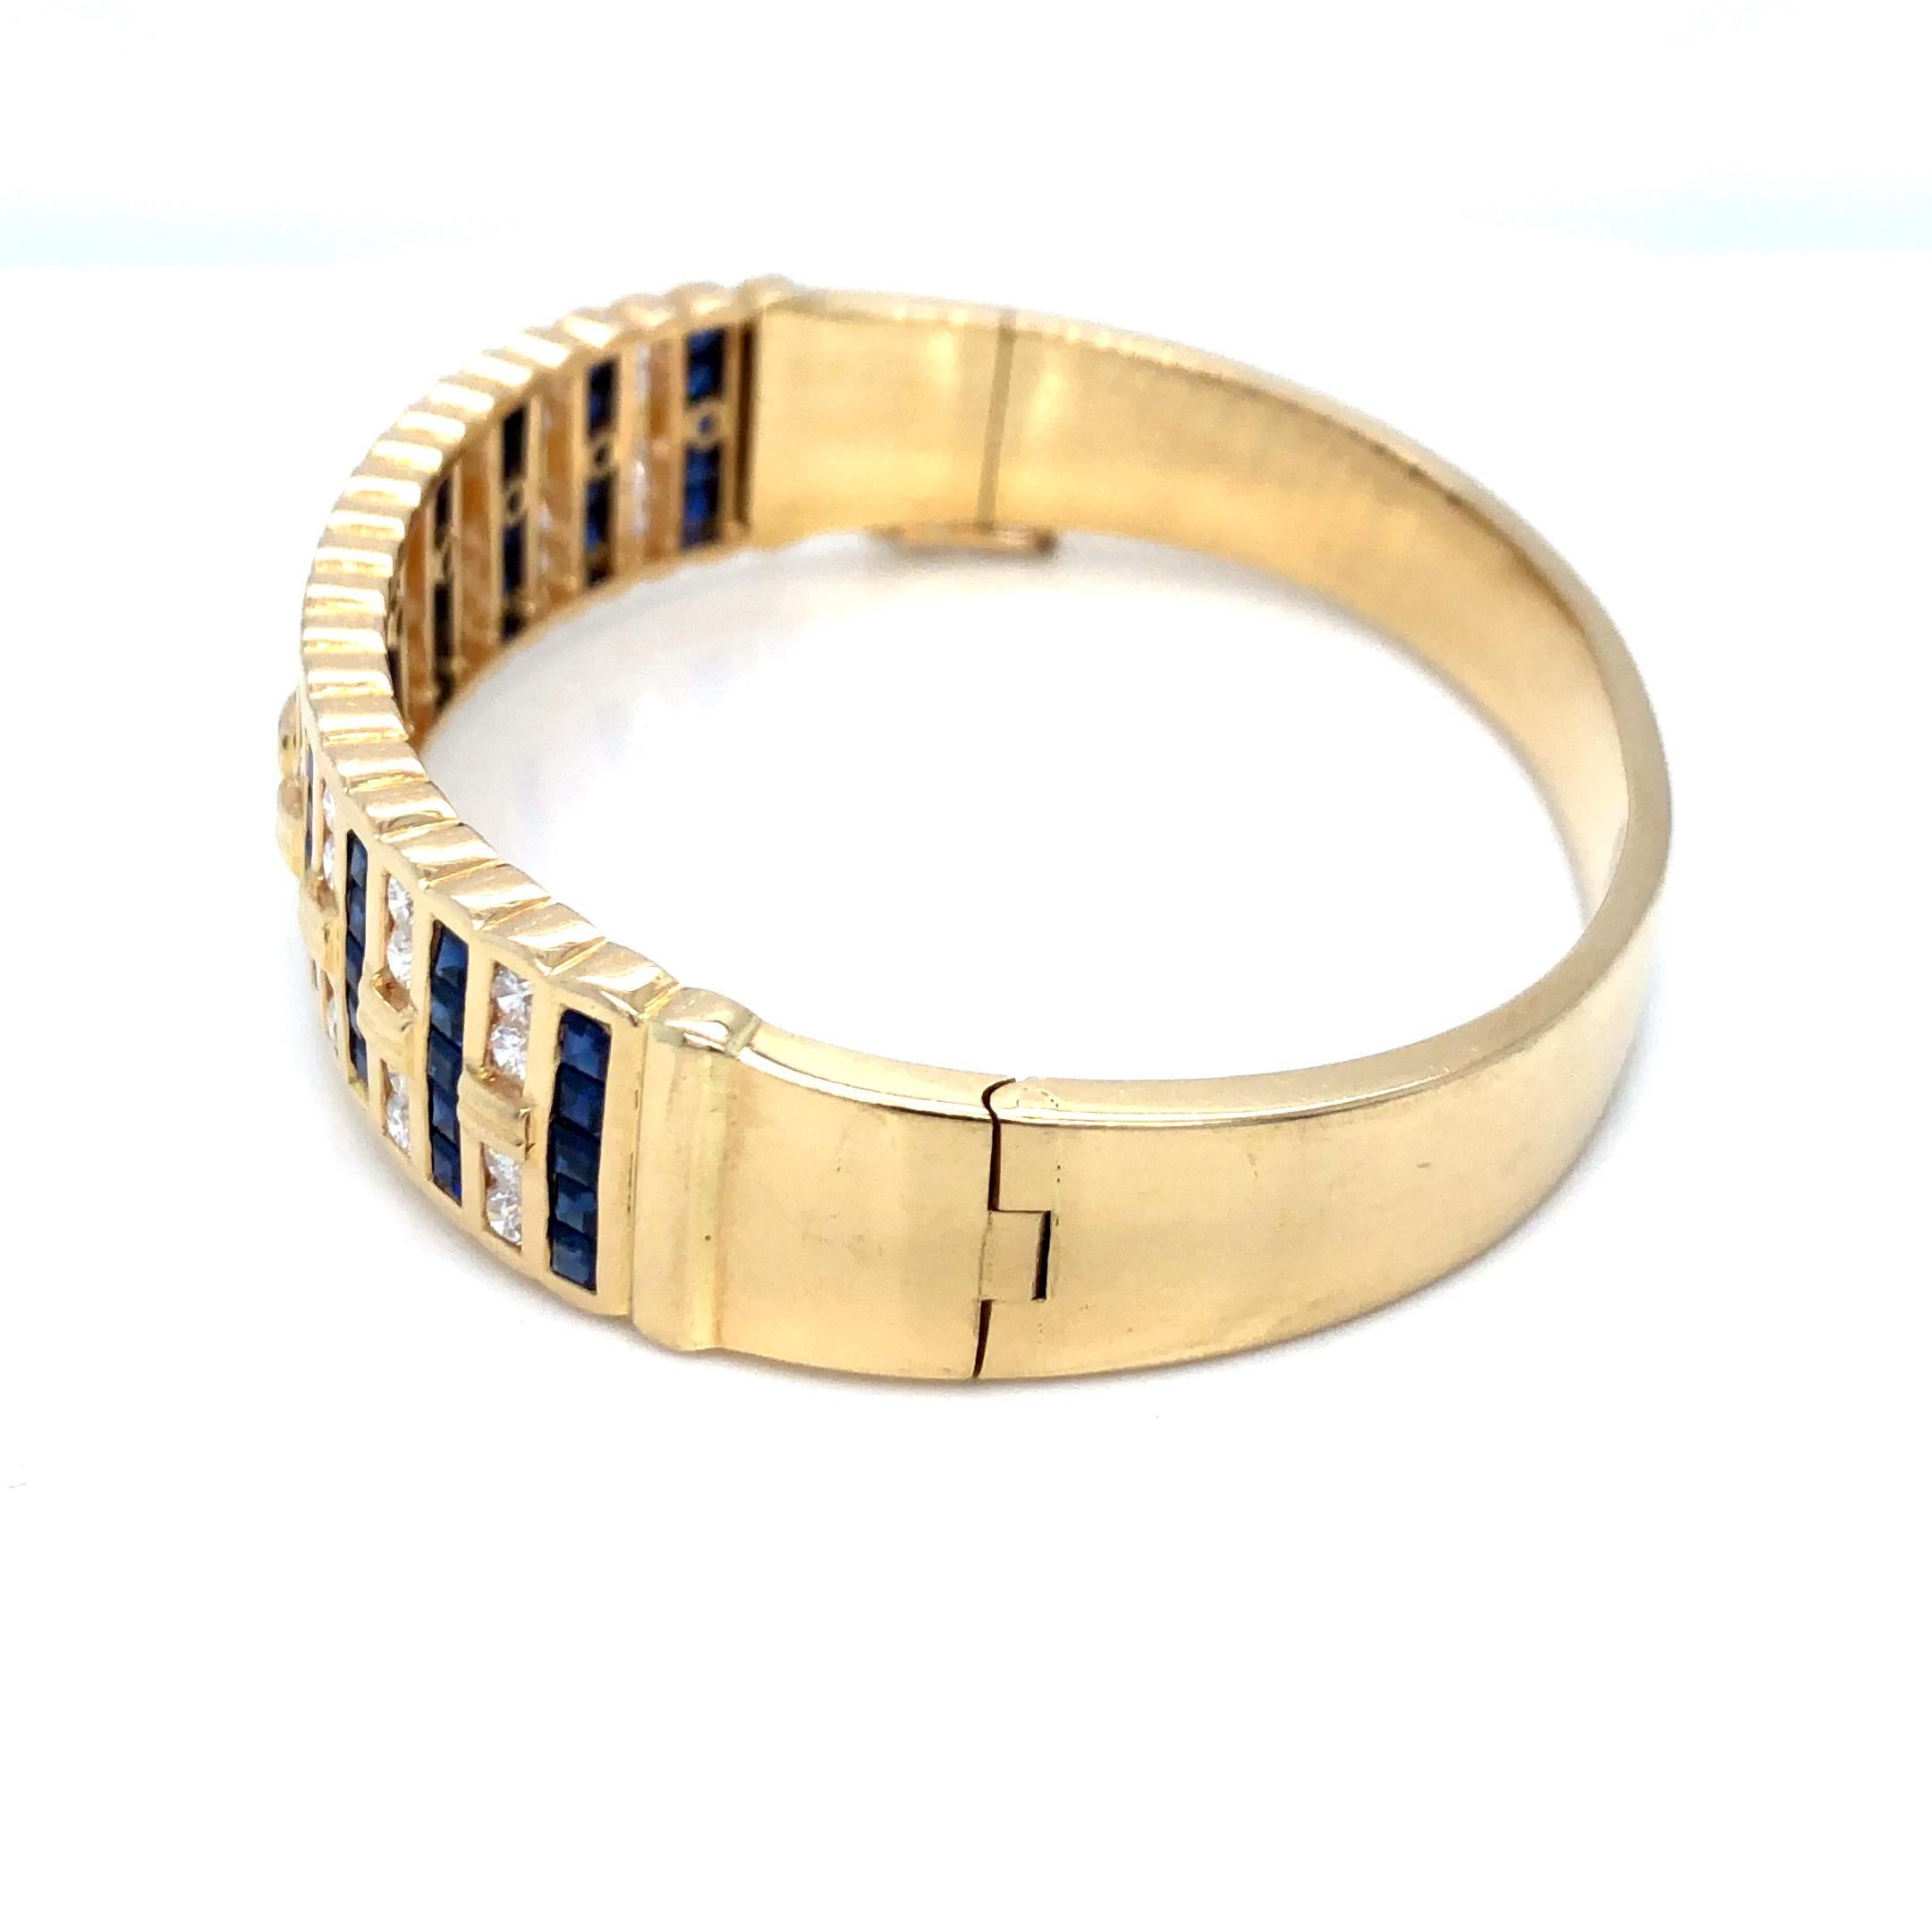 Wide Sapphire and Diamond Bangle Bracelet in 18K Yellow Gold. The bracelet features channel set 55 square cut sapphires and 40 brilliant round cut diamonds.
0.50